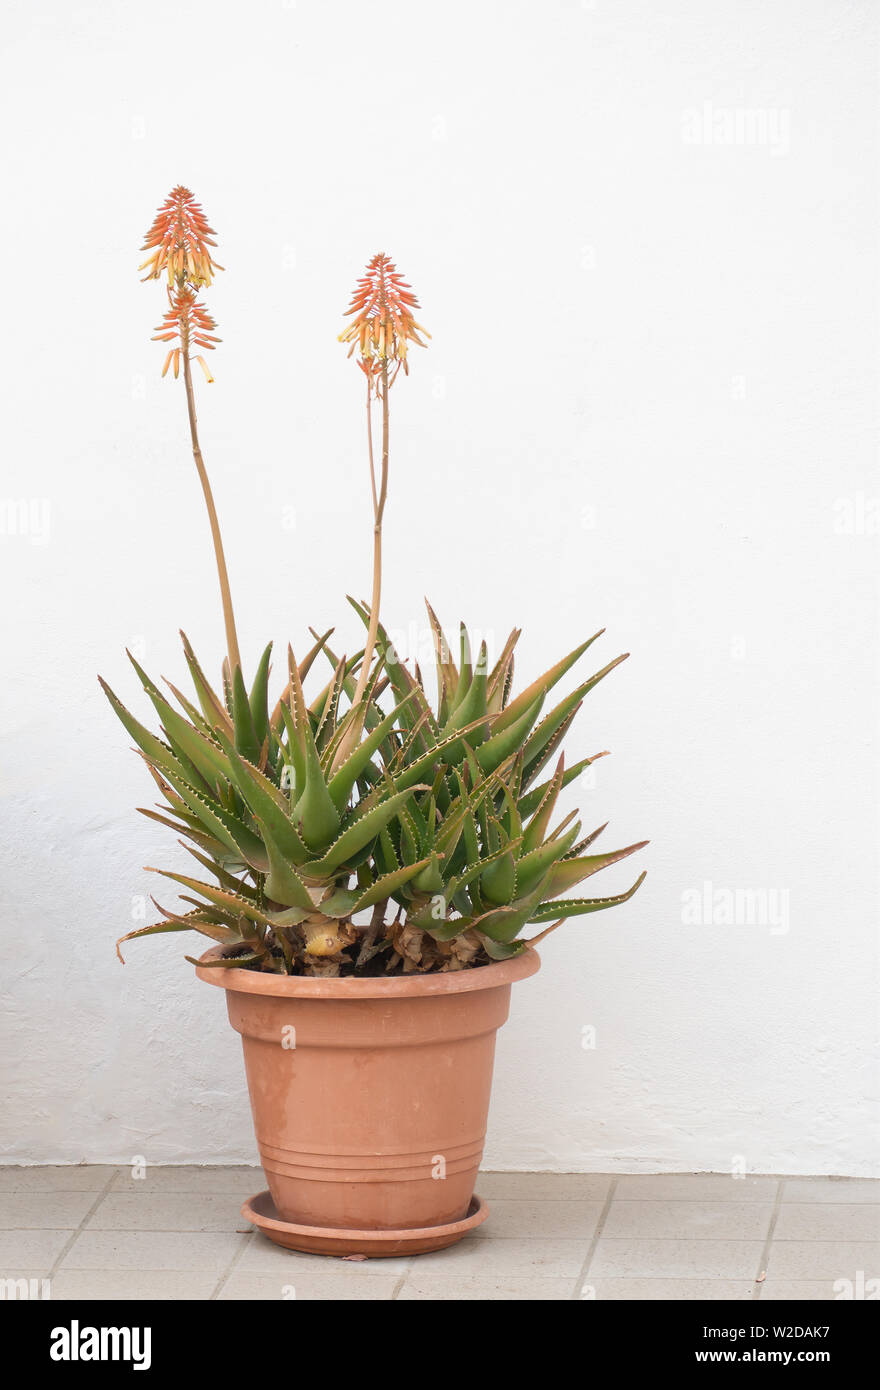 Aloe vera plant in flower, in pot against white wall. Stock Photo